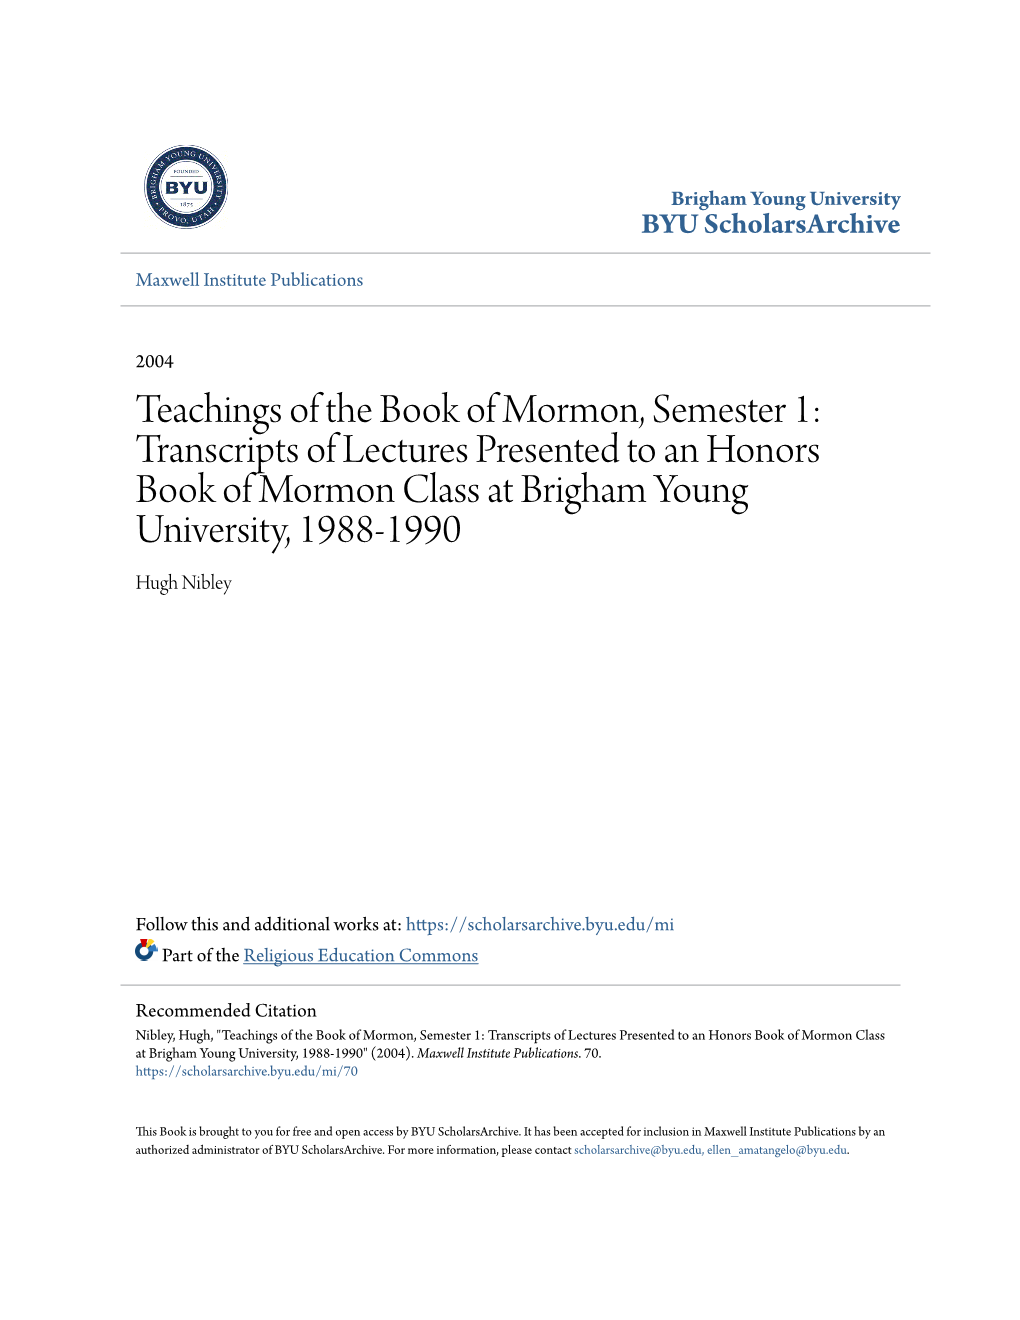 Teachings of the Book of Mormon, Semester 1: Transcripts of Lectures Presented to an Honors Book of Mormon Class at Brigham Young University, 1988-1990 Hugh Nibley